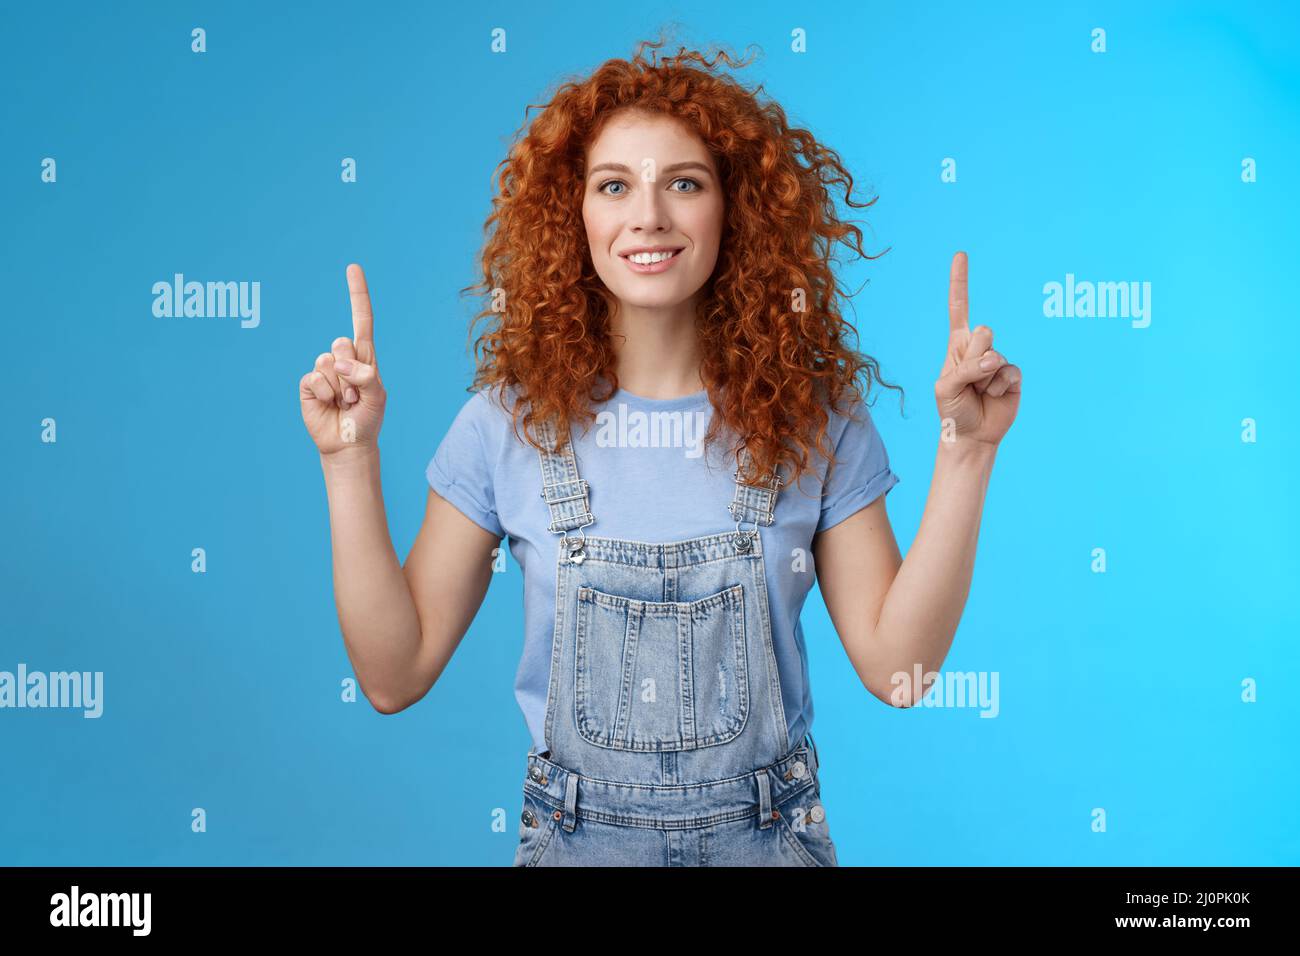 Motivated happy cheerful redhead silly curly woman pointing up inrdex finger smiling charmed impressed excited showing awesome p Stock Photo